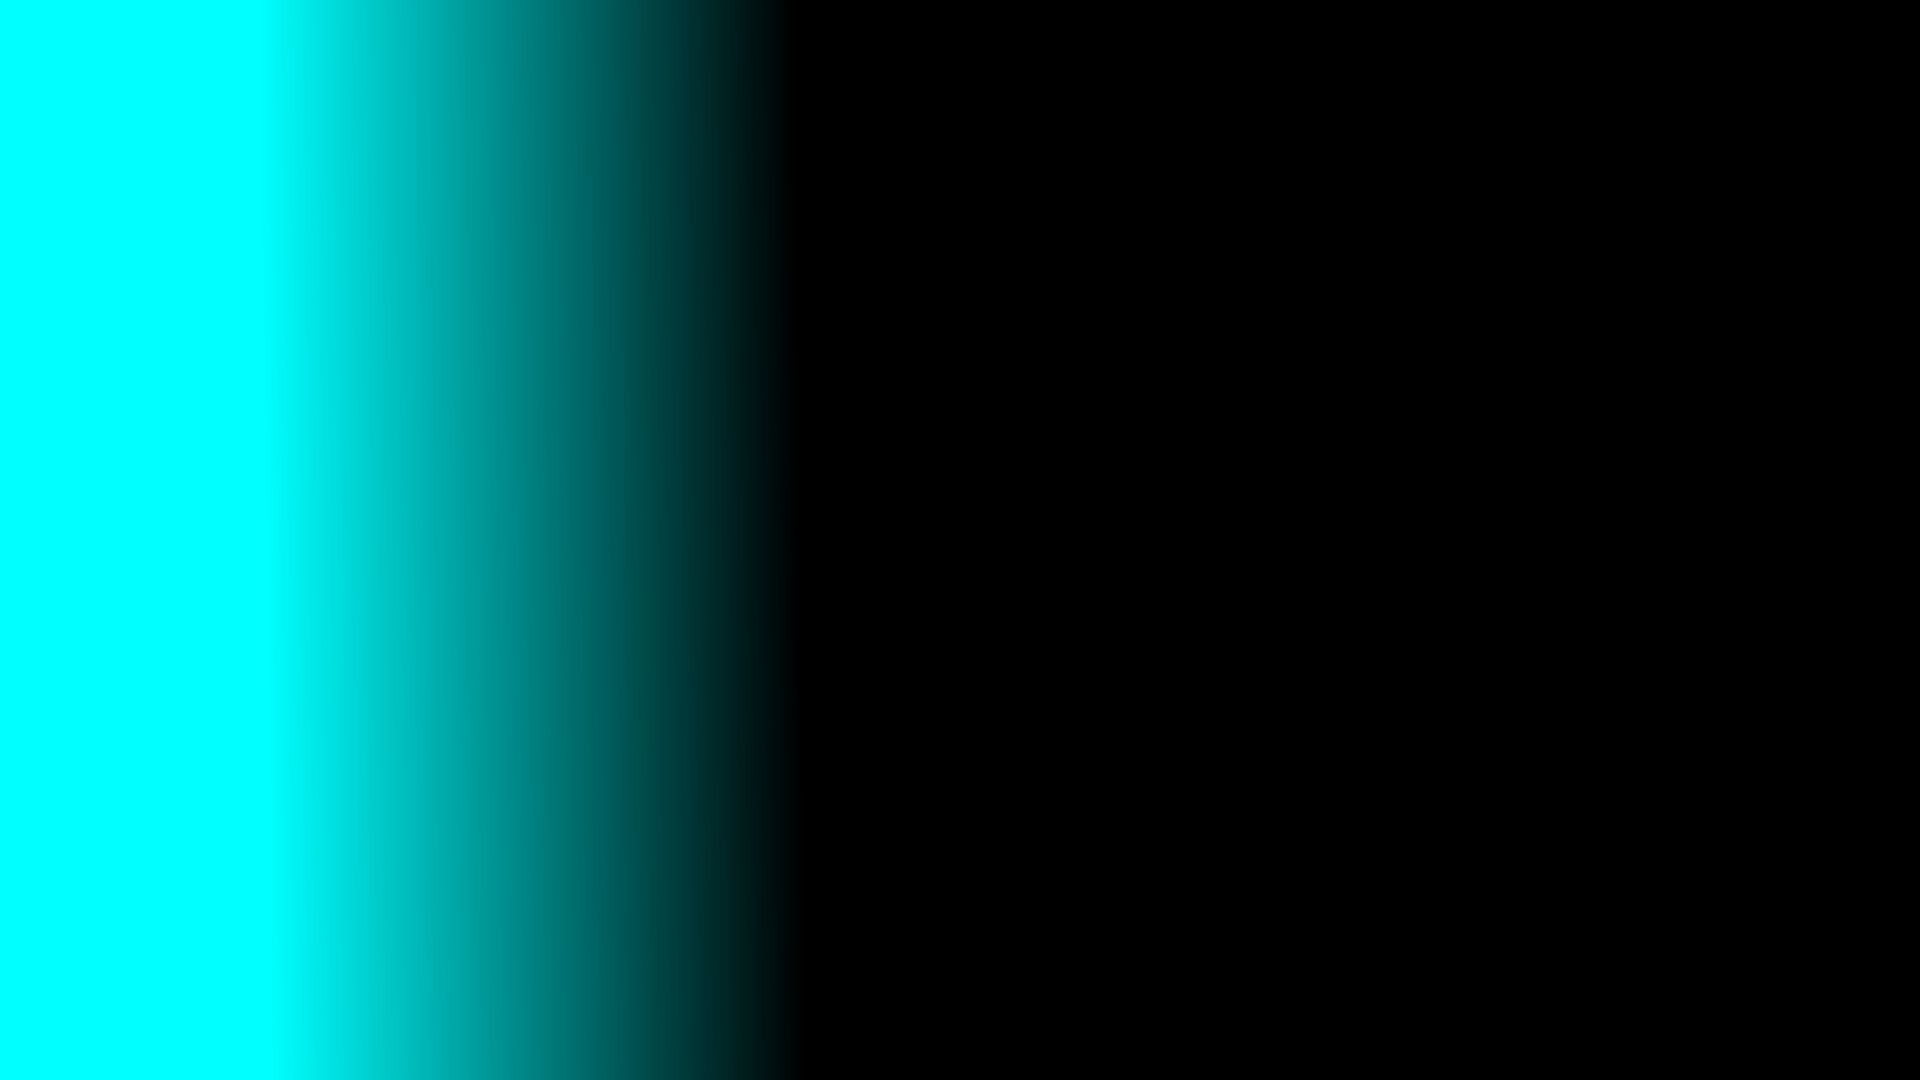 Black and Teal Wallpaper Free Black and Teal Background